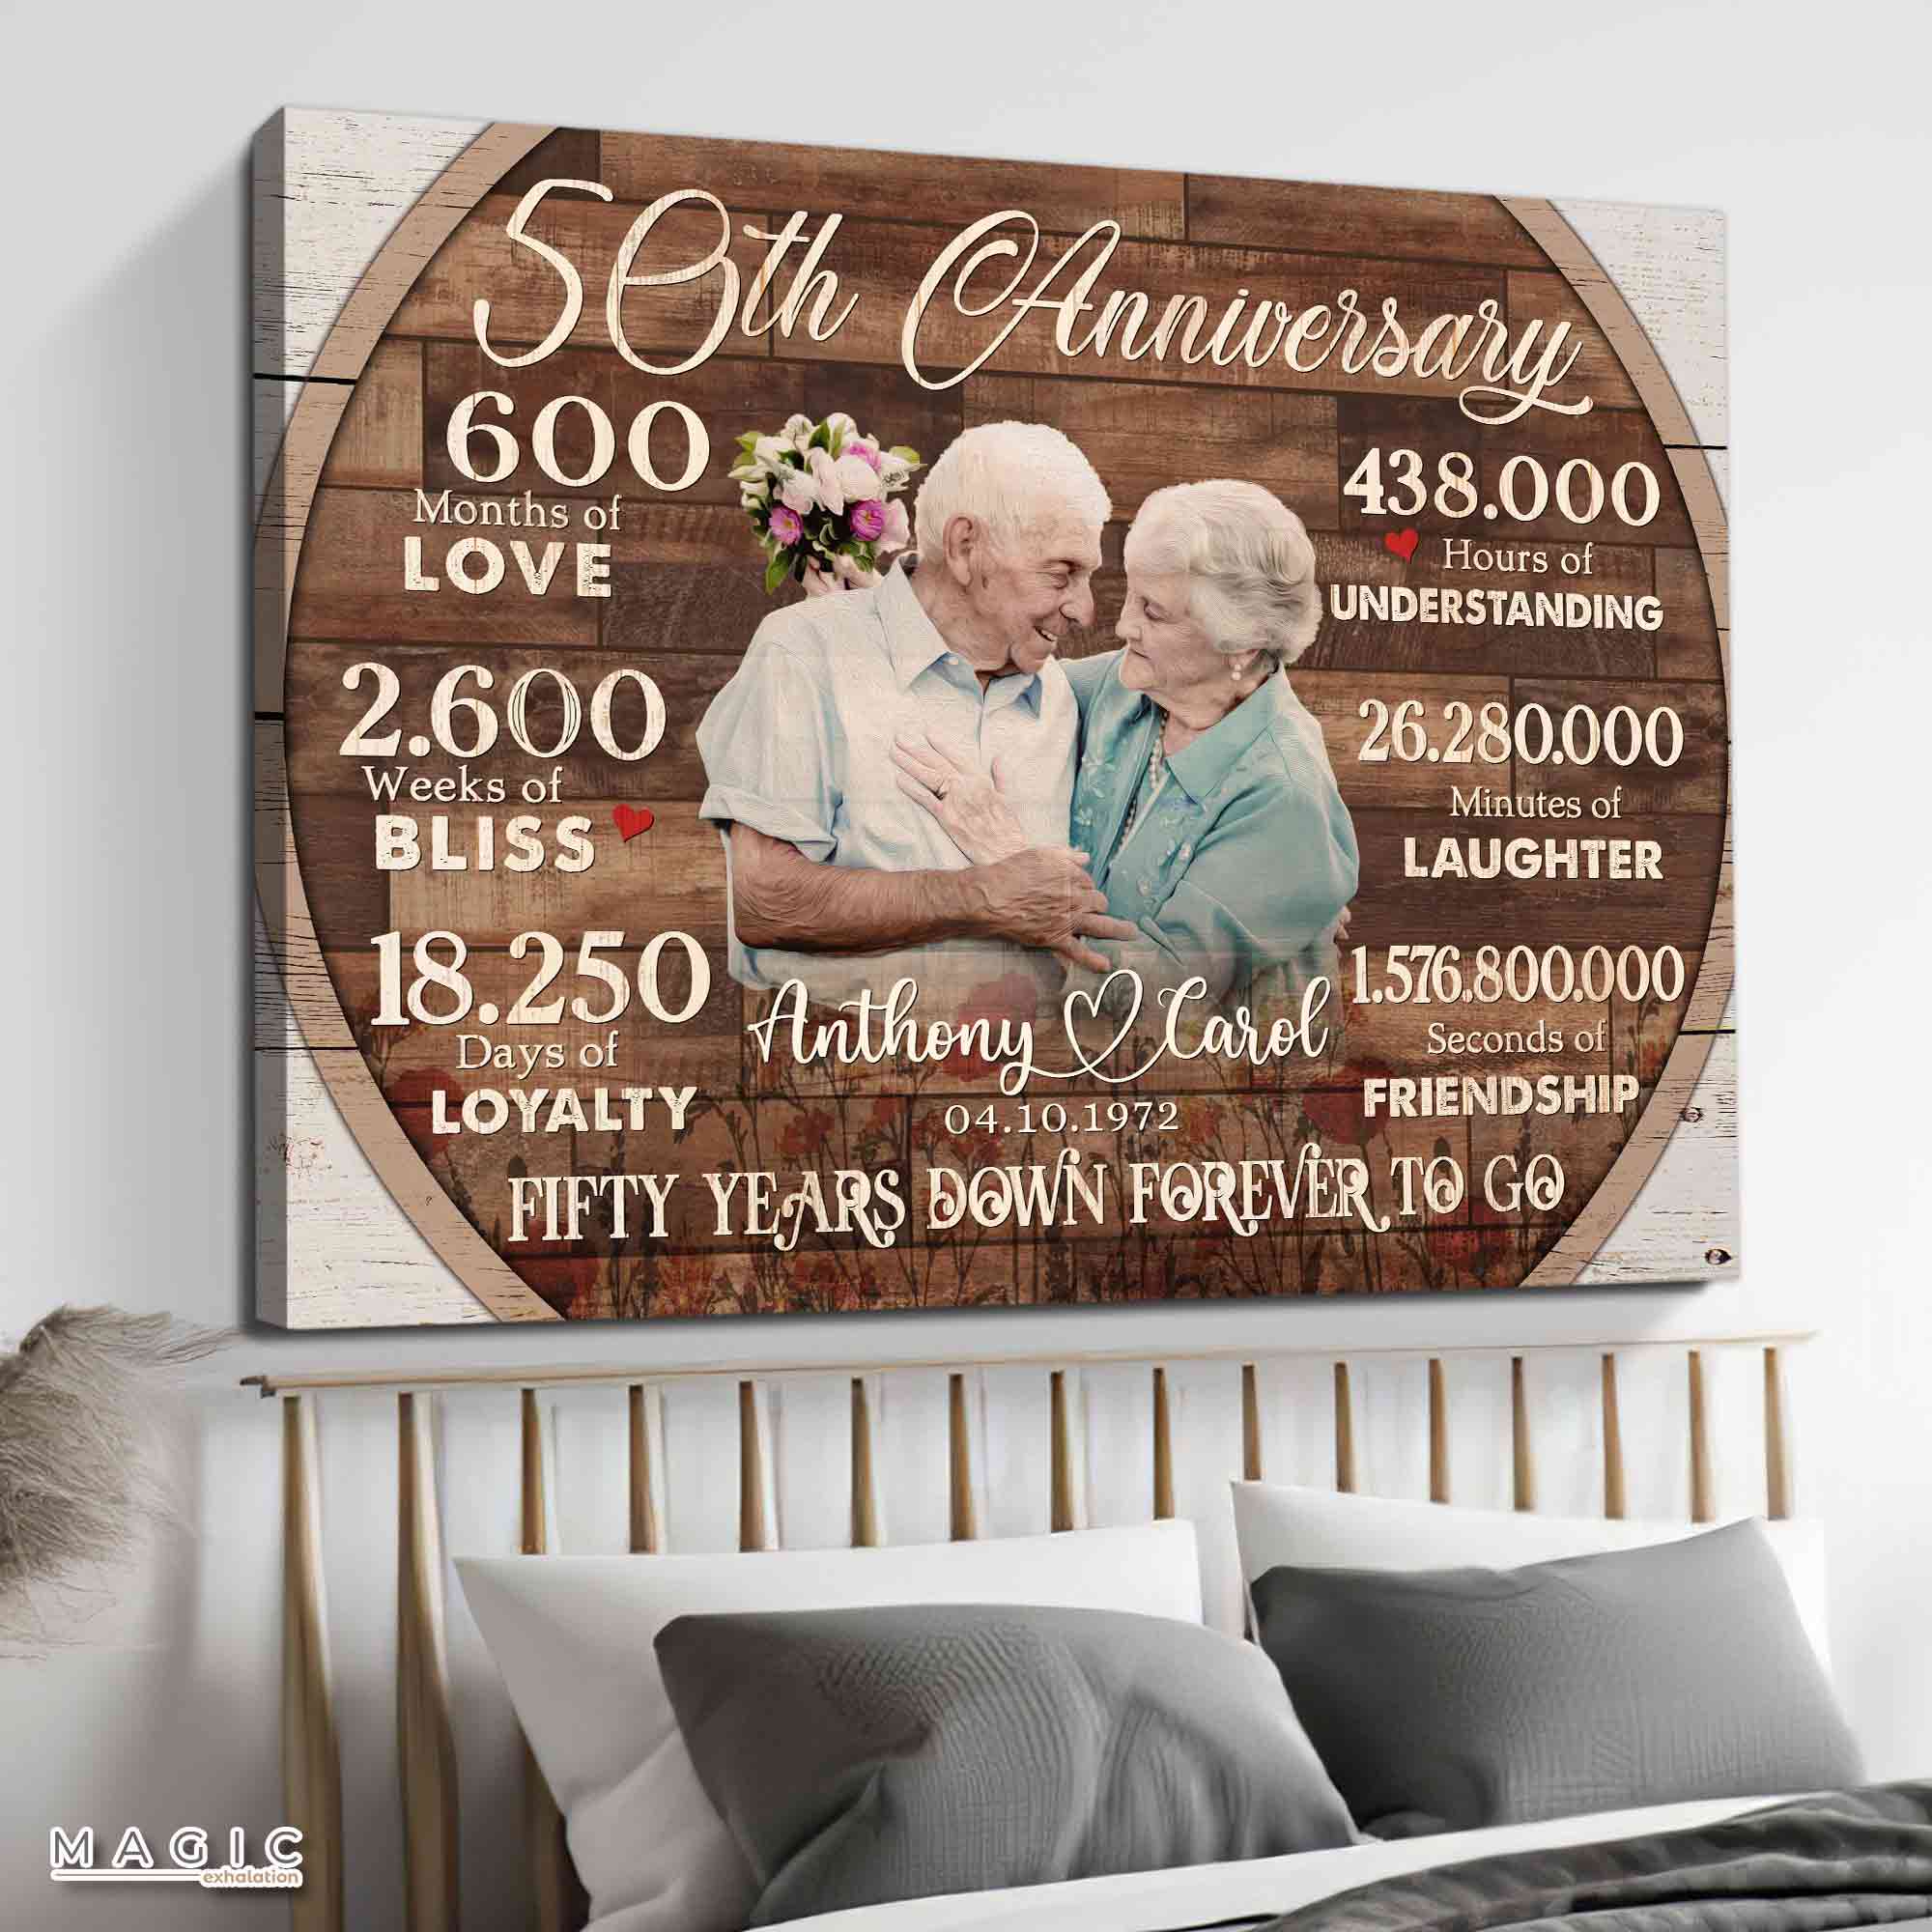 50th wedding anniversay gifts,personalized 50th wedding anniversary gifts